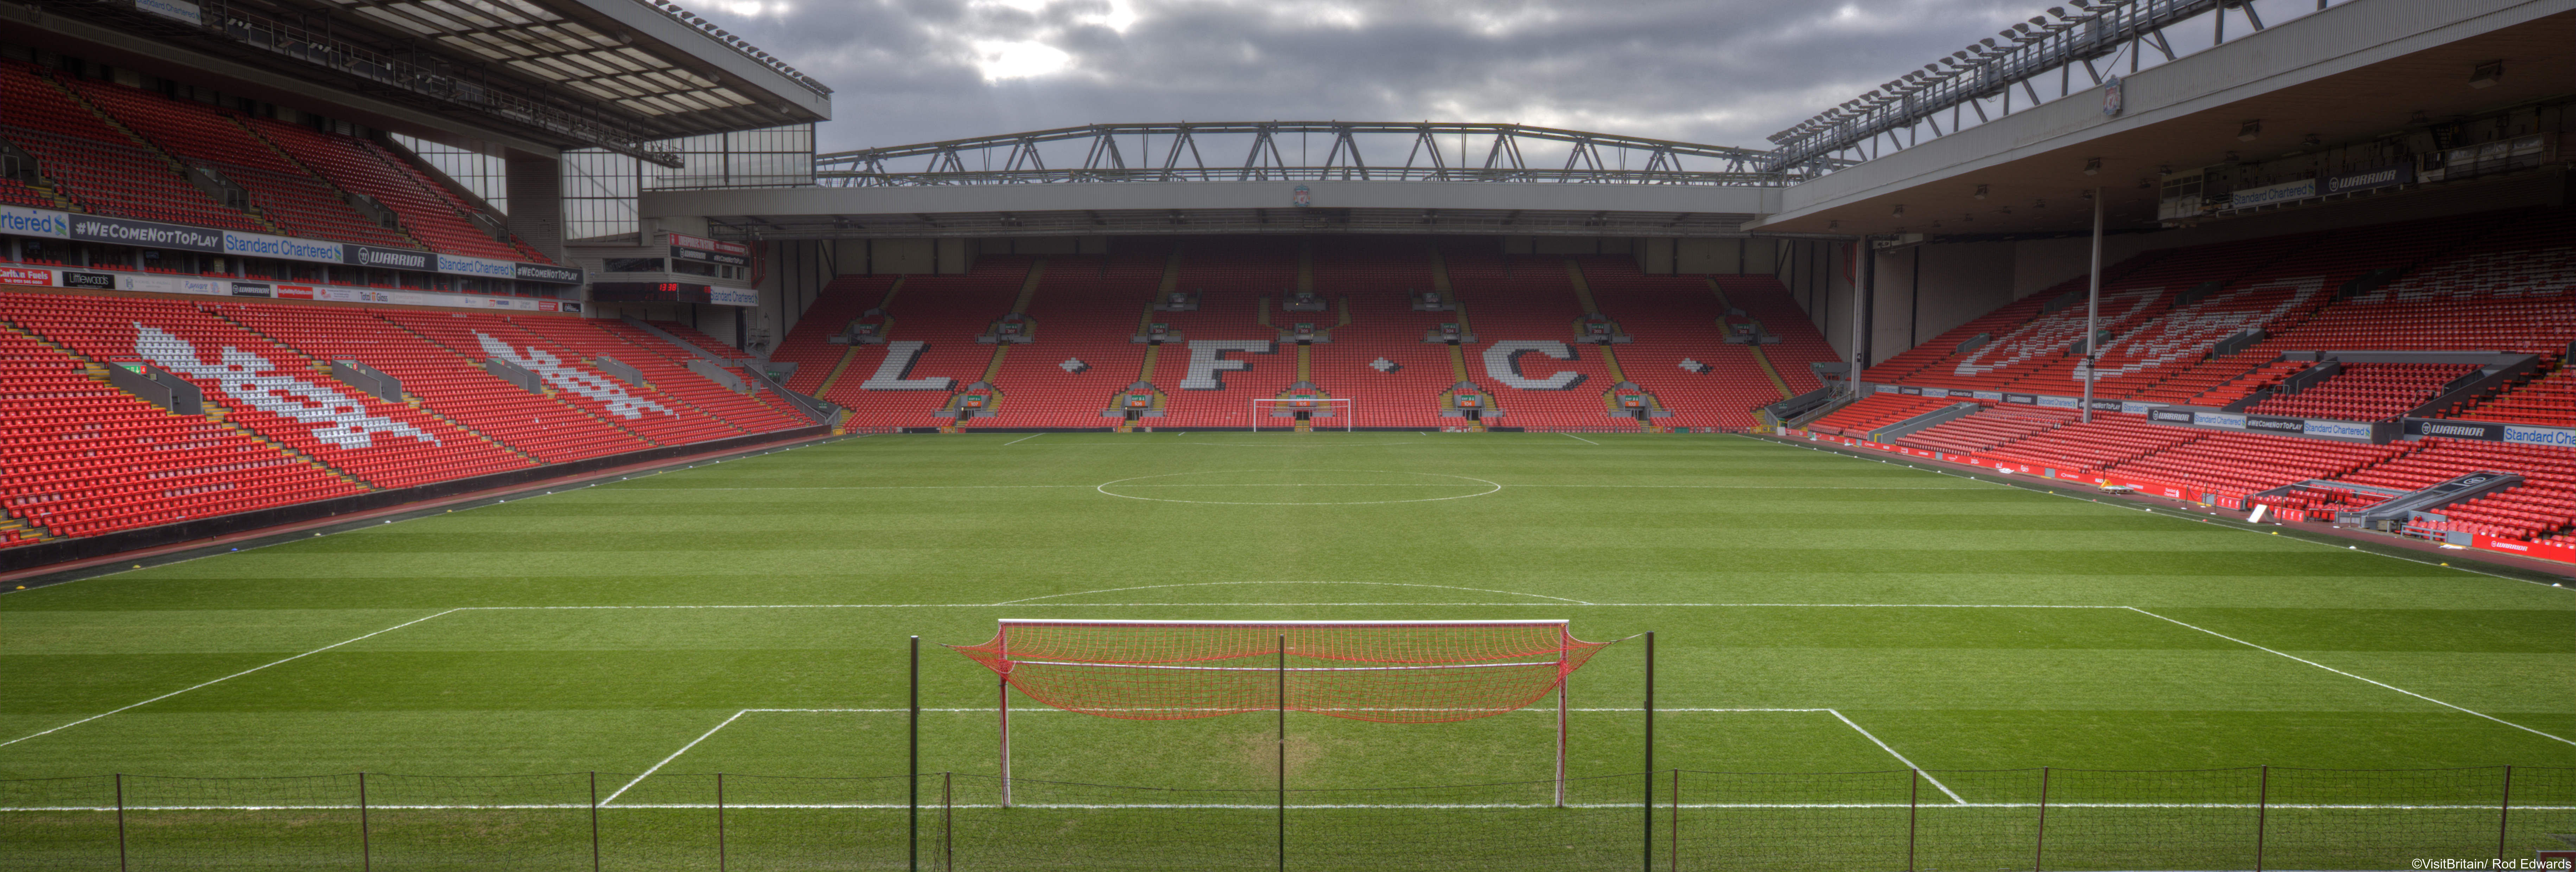 Anfield Stadium in Liverpool, one of England's most historic football grounds.